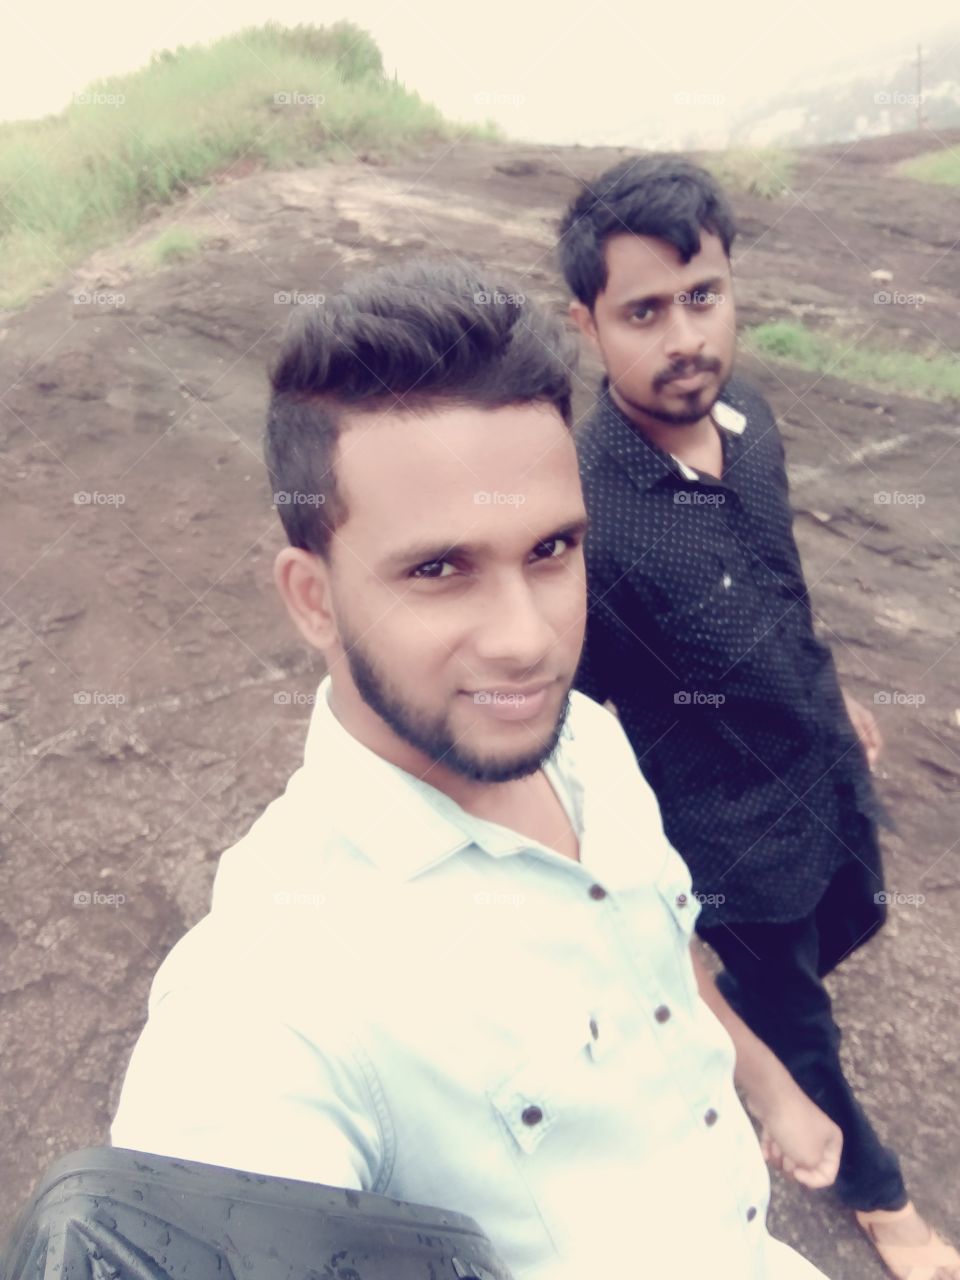 friend with me